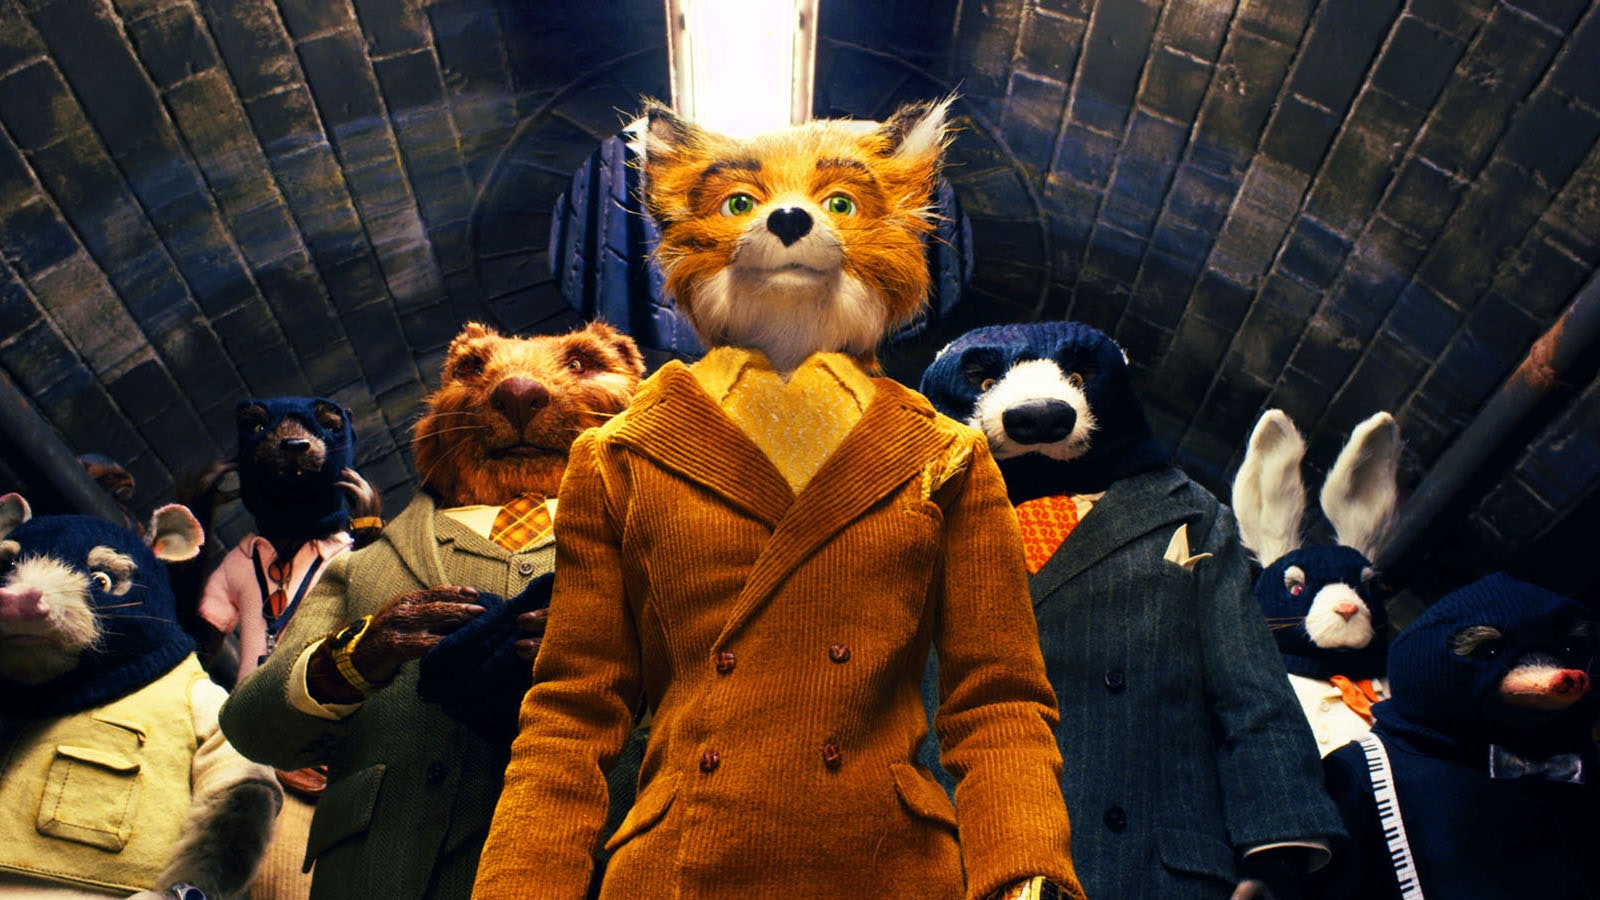 FANTASTIC MR. FOX, foreground: Mr. Fox (voice: George Clooney), 2009. ph: Greg Williams/TM and copyright ©Fox Searchlight. All rights reserved/courtesy Everett Collection